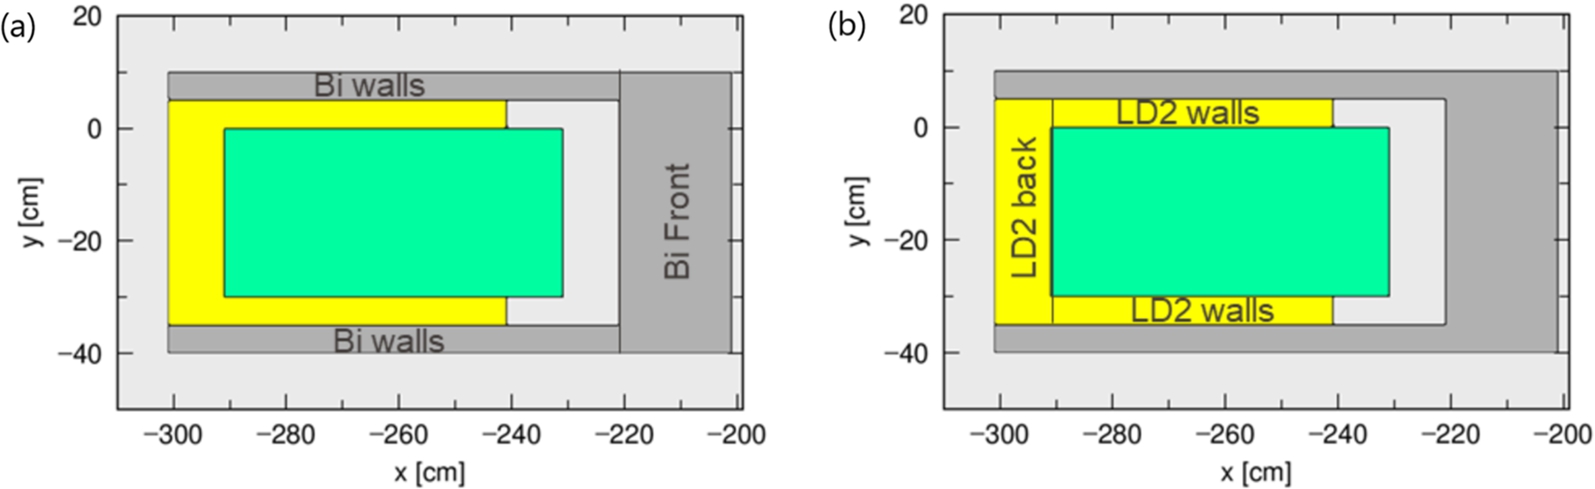 Studying the baseline geometry to assess the impact of individual components: (a) investigation of bismuth shielding by the front section and walls; (b) examination of the effect of LD2 by the back section and walls.